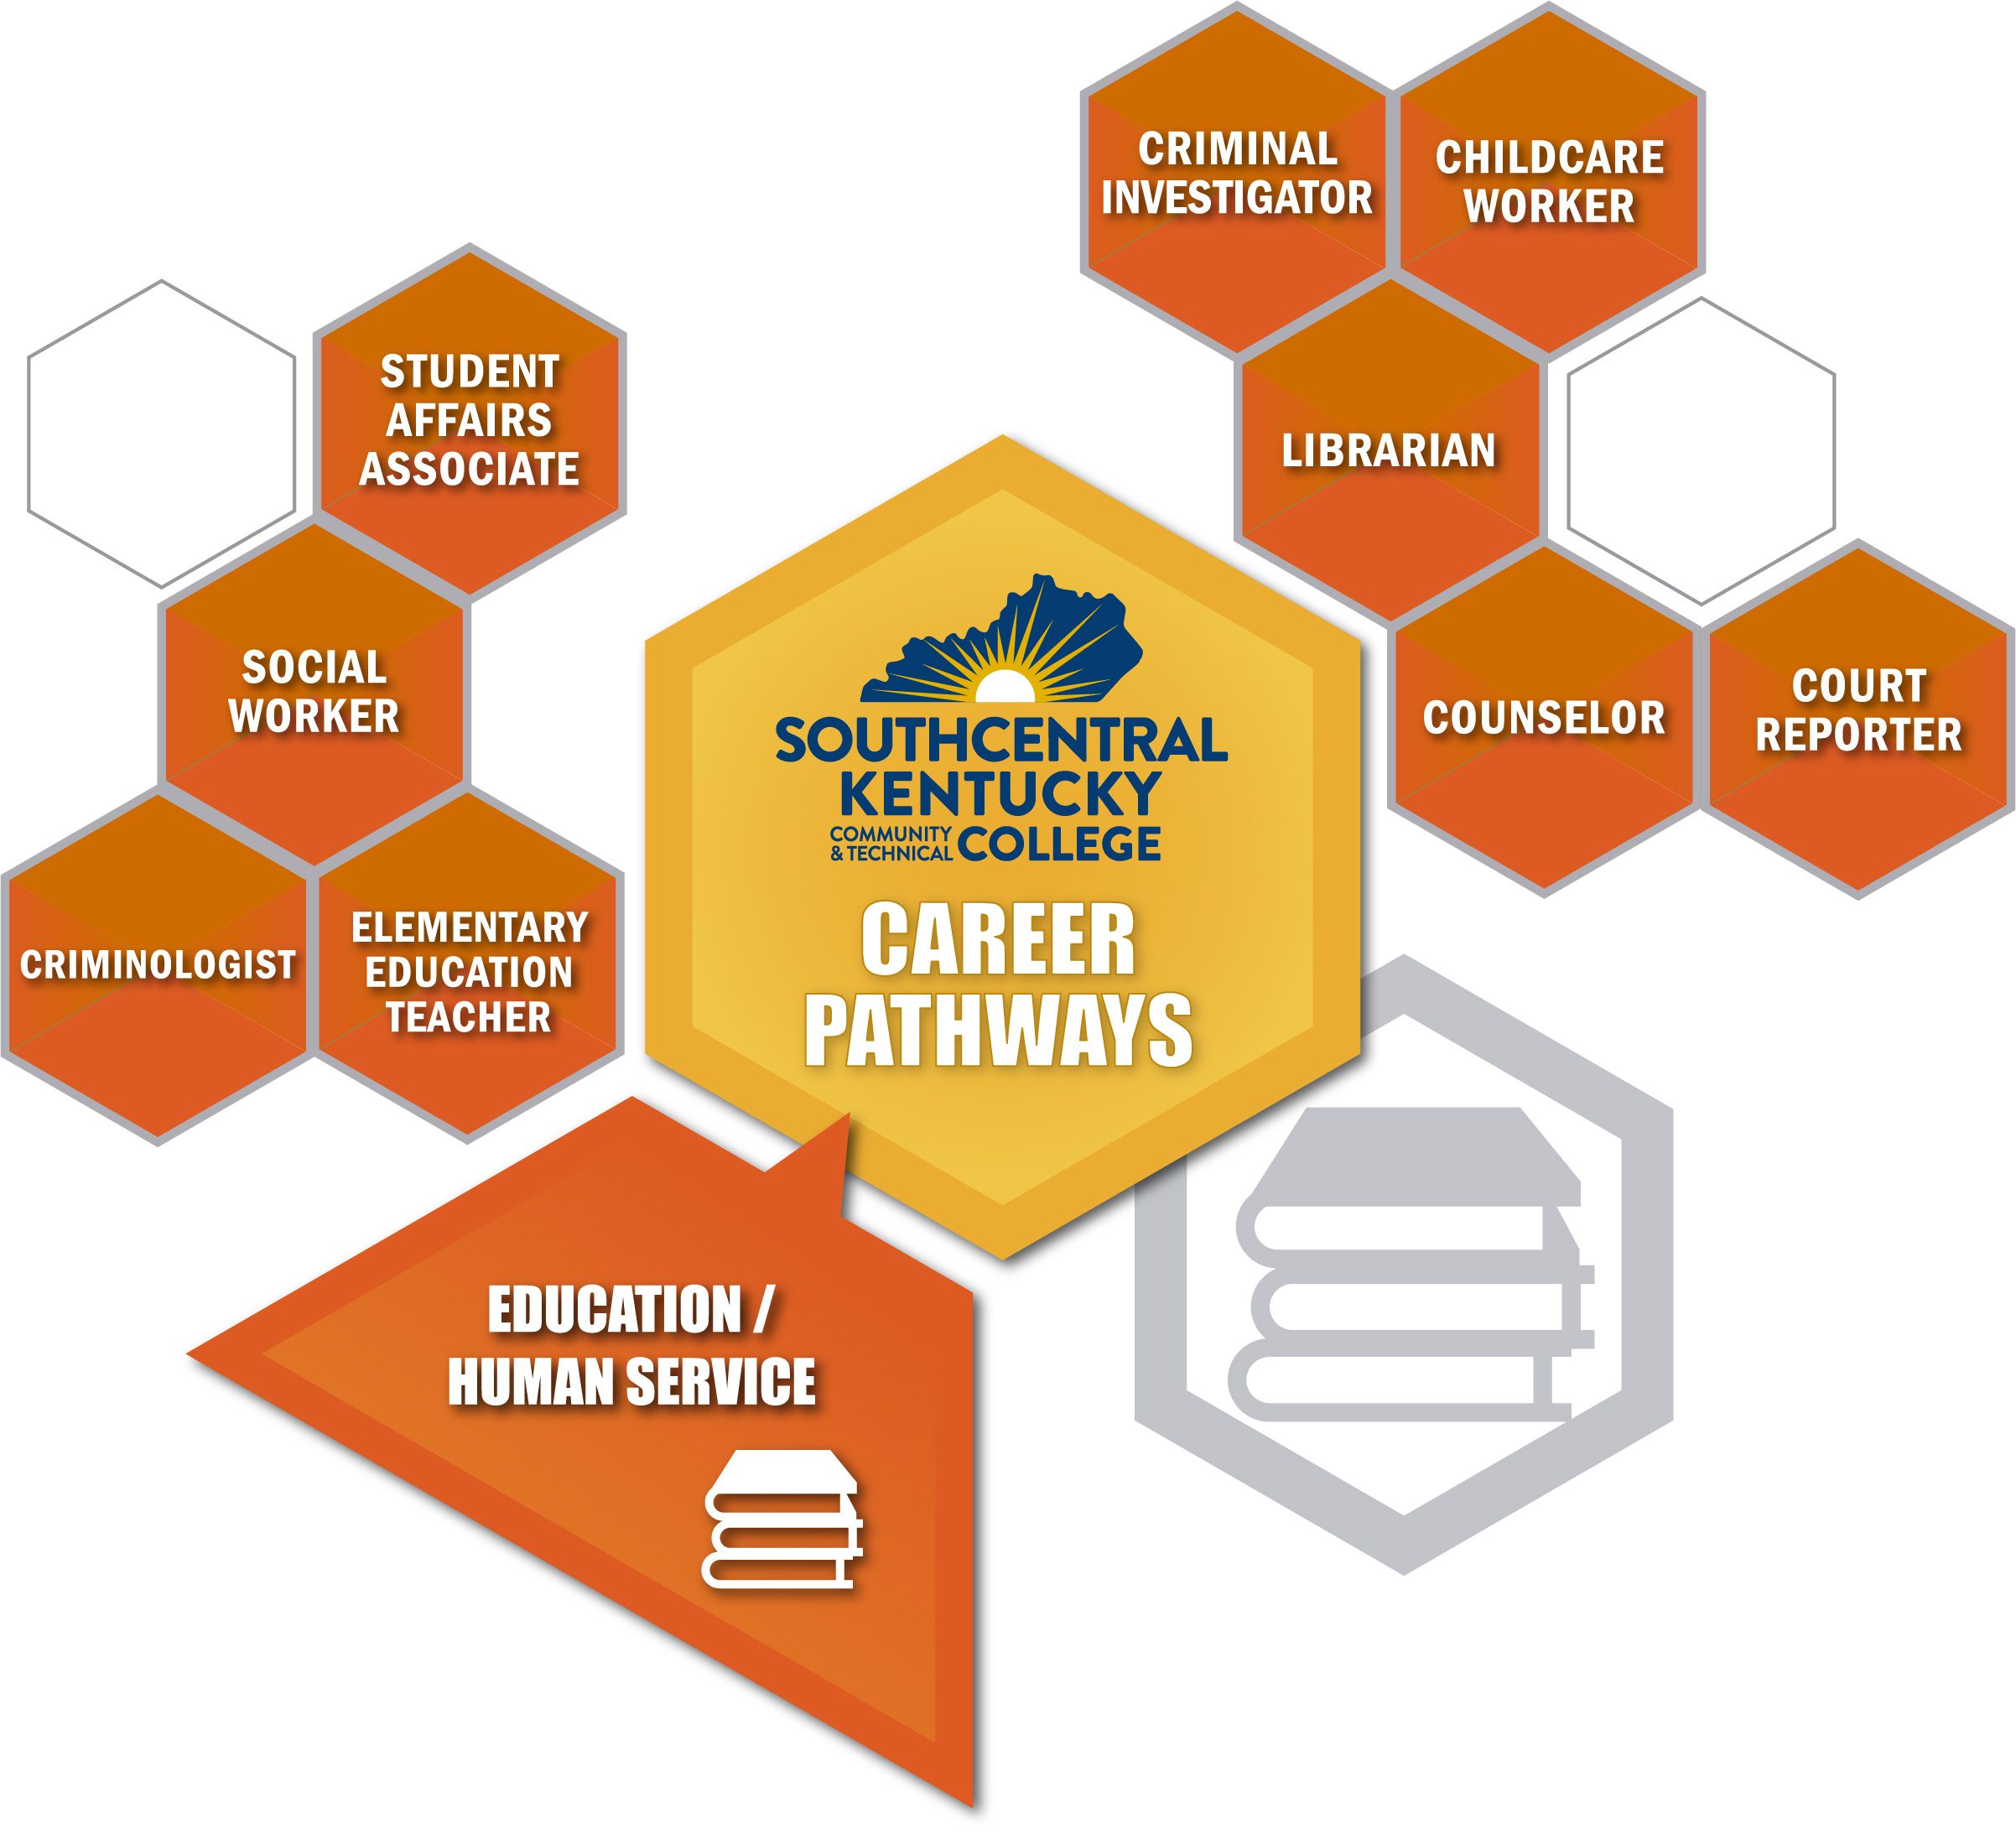 Social career sector with related careers listed. Same careers listed below the image.